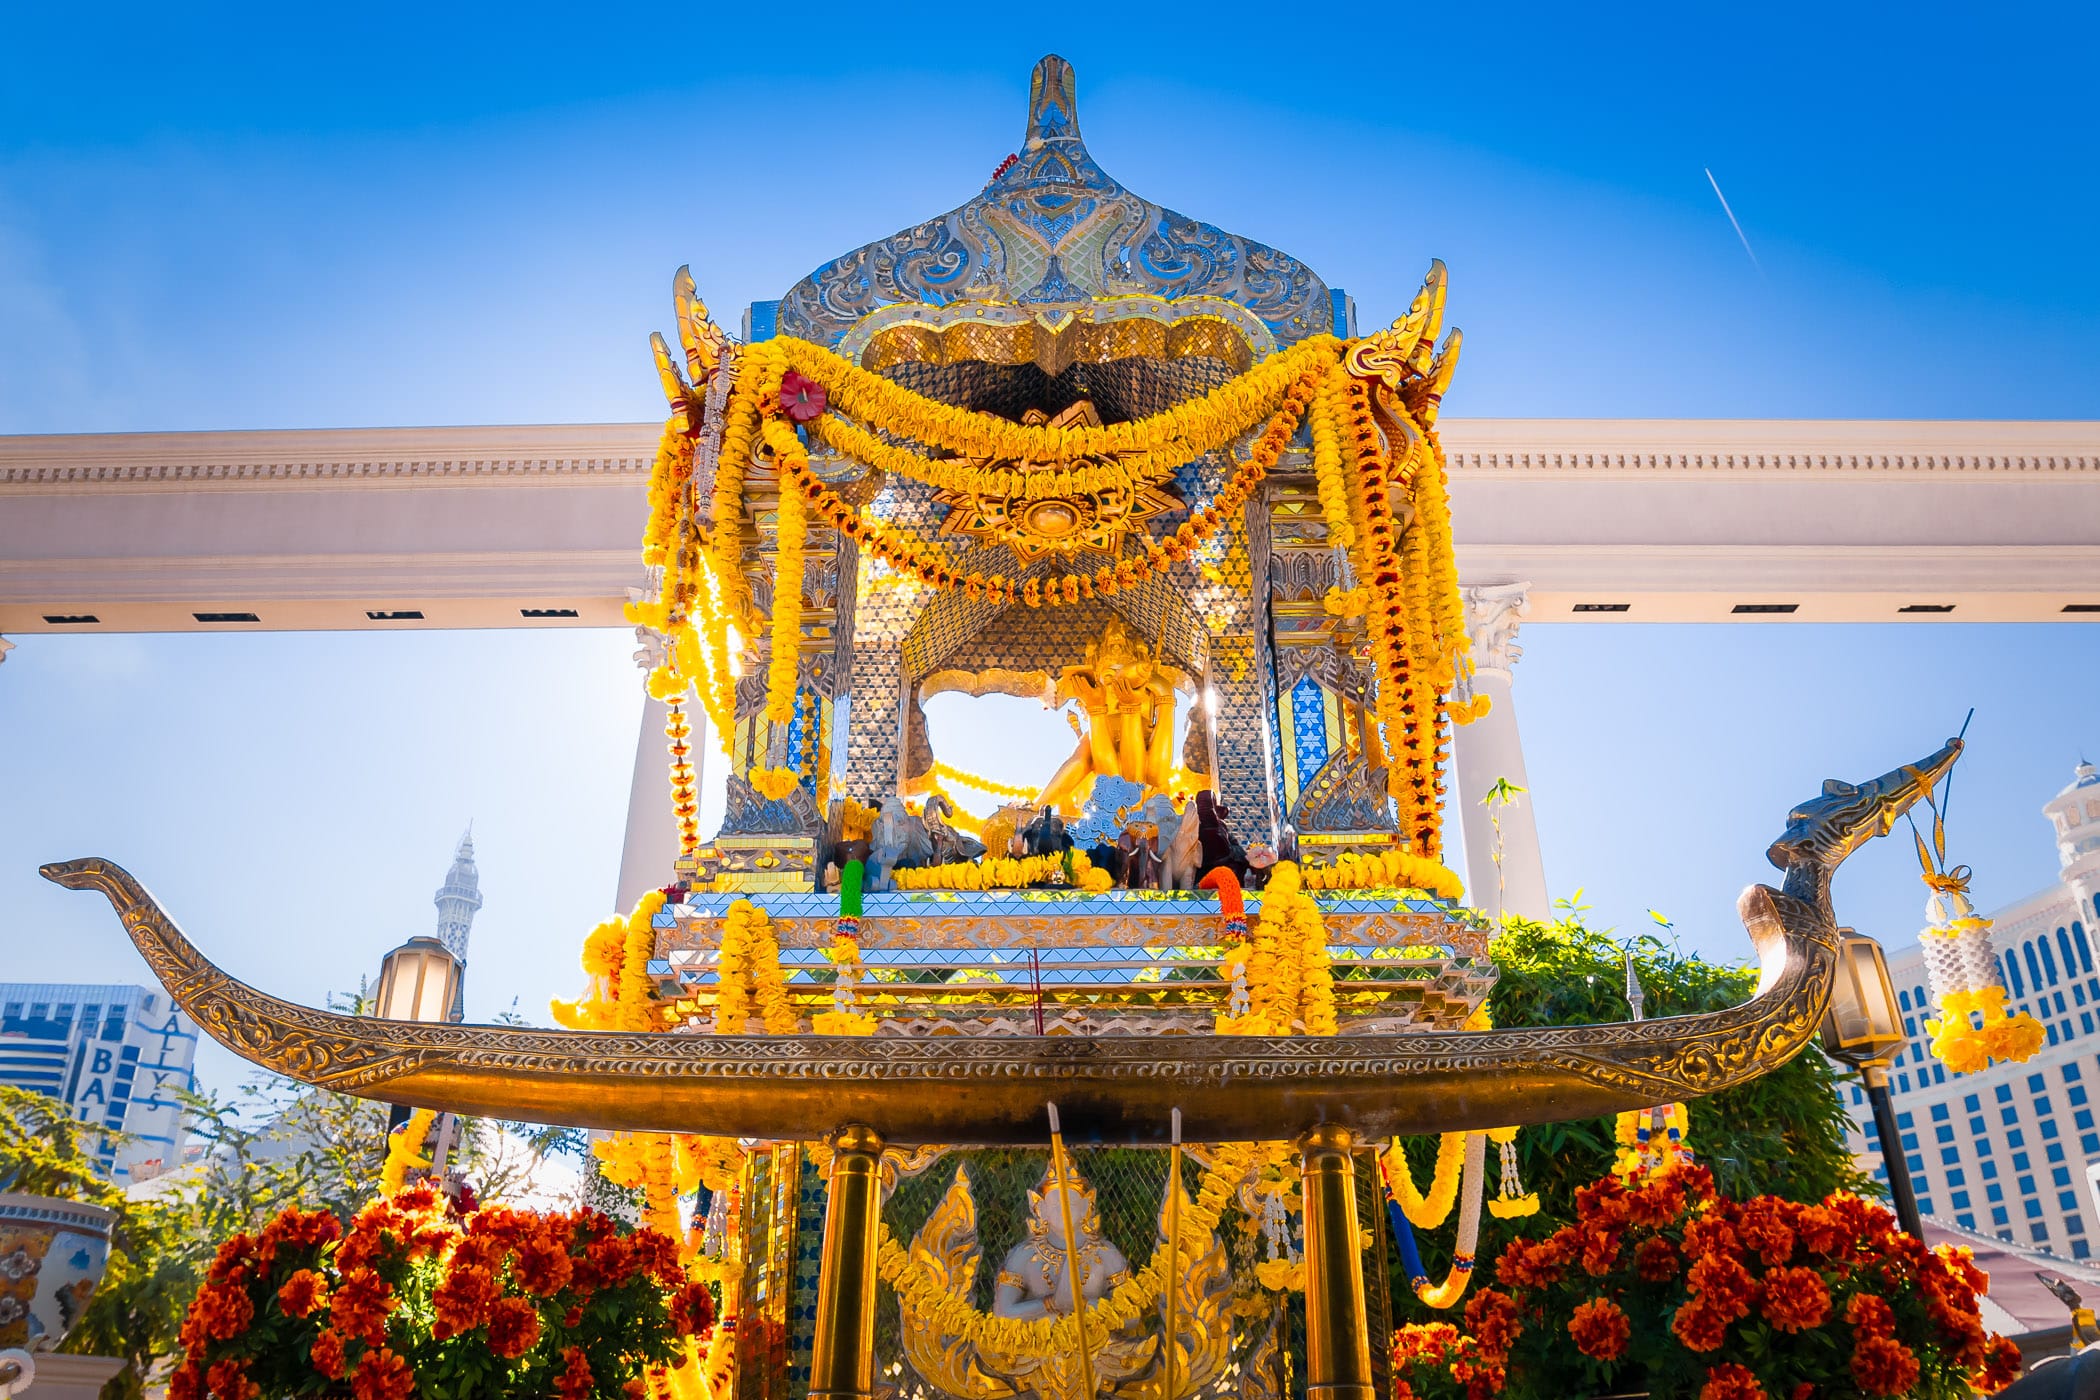 The Erawan Shrine (or Shrine of the Four-Faced Brahma) at Caesars Palace, Las Vegas, was built in 1984 and is a replica of the original in Bangkok, Thailand. It was donated by newspaper tycoons Mr. and Mrs. Kamphol Vacharaphol and Mr. Yip Hon, a prominent figure in Hong Kong and is considered a Hindu holy site. Visitors express gratitude for wishes granted by offering flowers, incense, money (which Caesars donates to charities in Thailand) or by placing small wooden elephants upon the shrine.